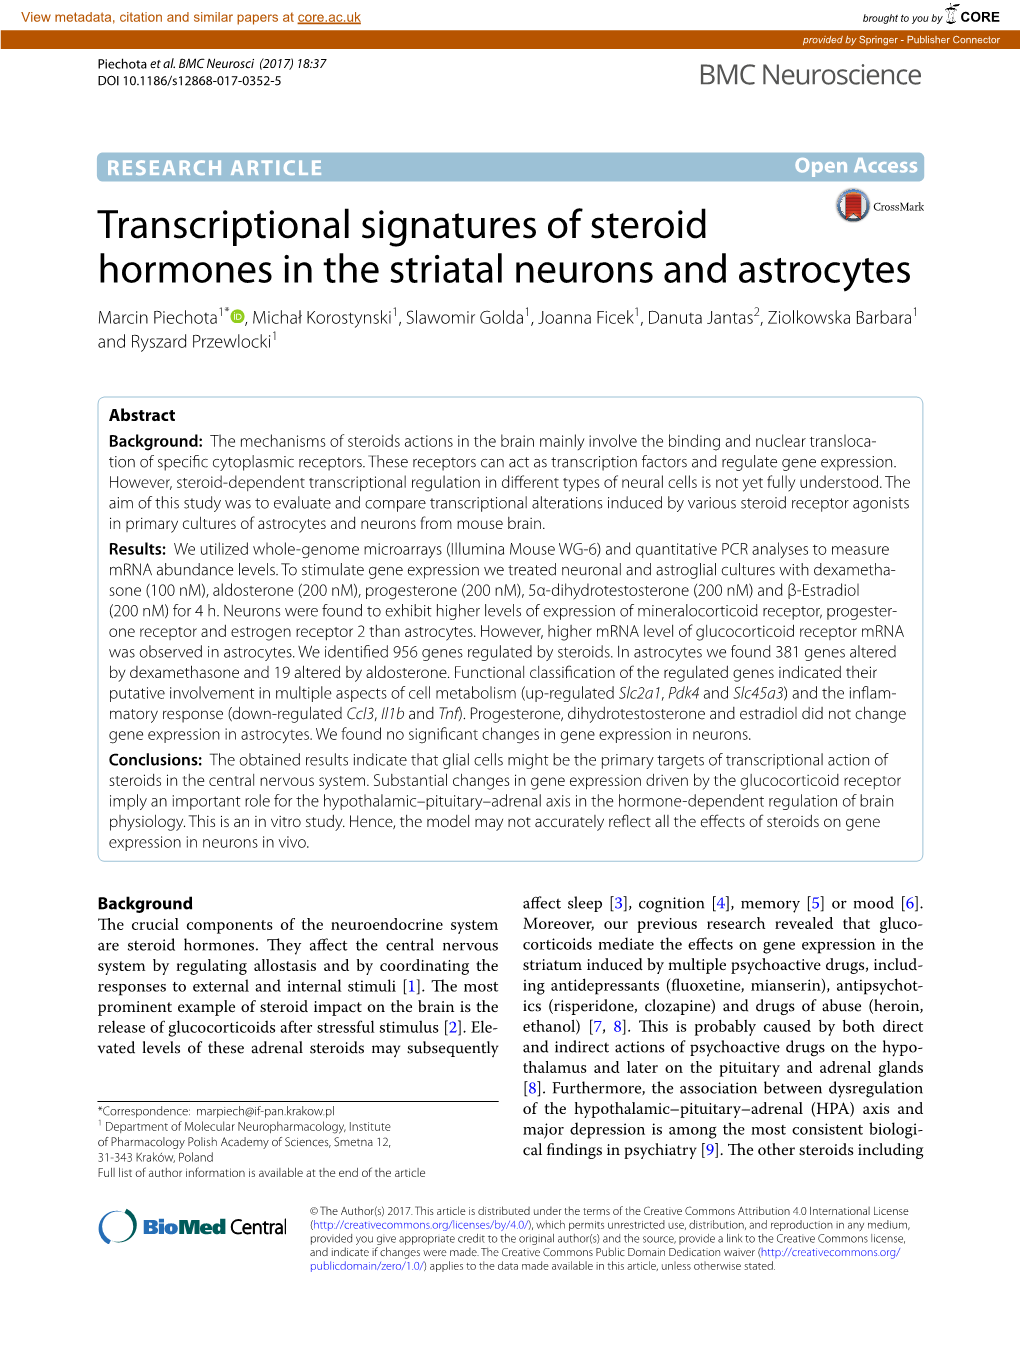 Transcriptional Signatures of Steroid Hormones in the Striatal Neurons